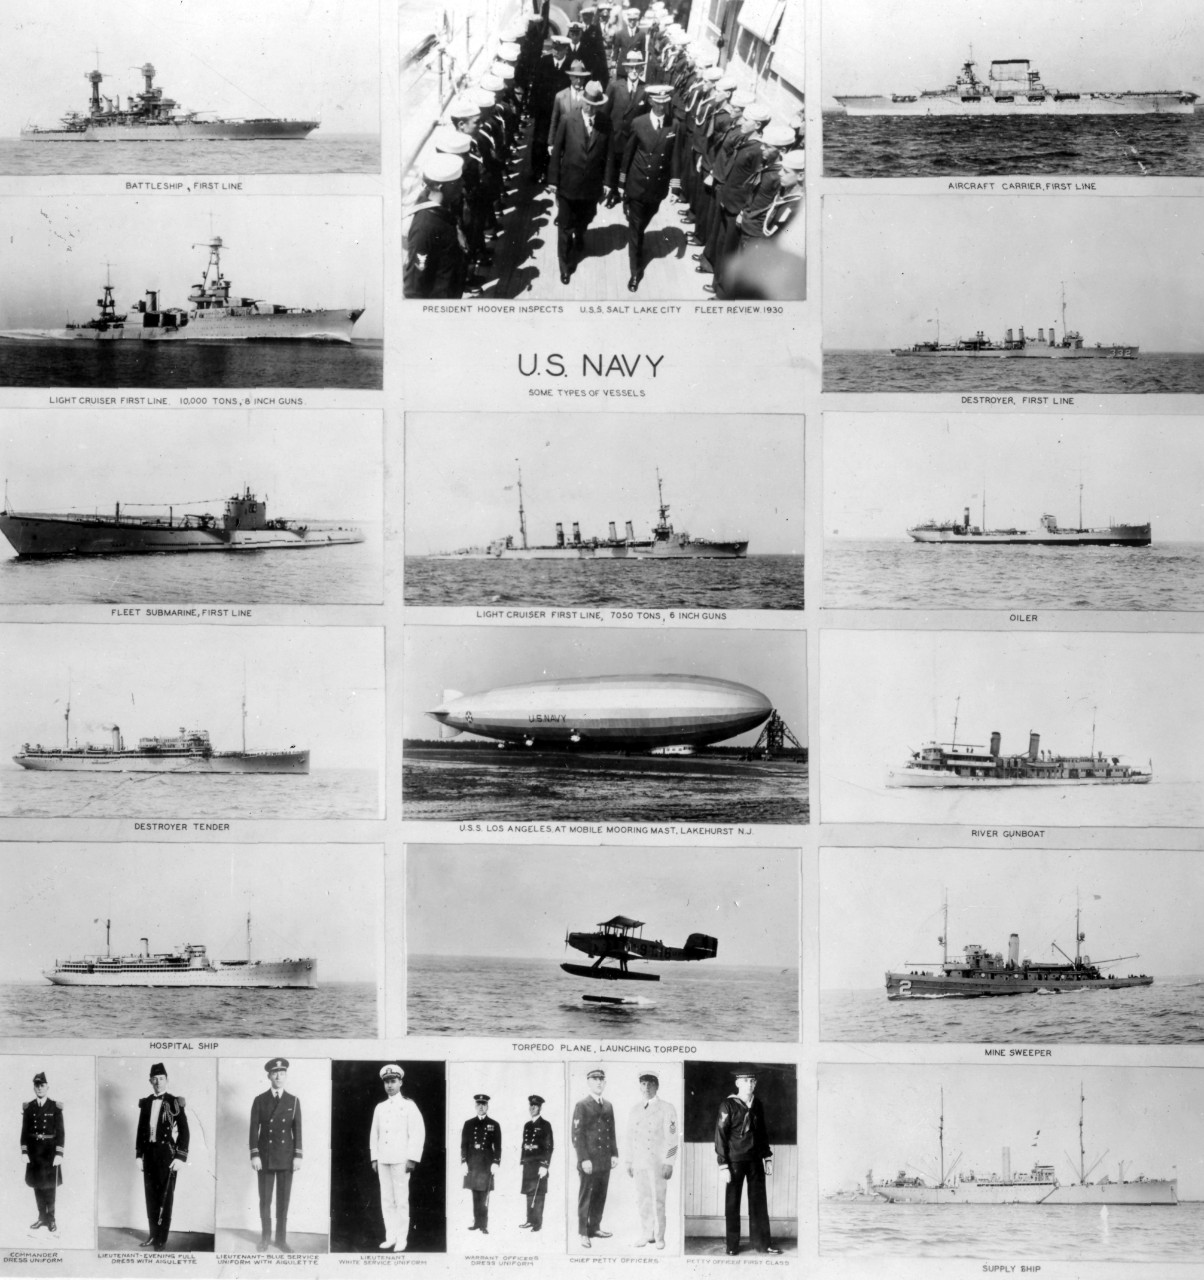 United States ships and officers in miscellaneous scenes. Examples of uniforms, battleships, light cruisers, submarine, destroyer, hospital ship, aircraft carrier, oiler, gunboat, mine sweeper, and a supply ships are shows. 